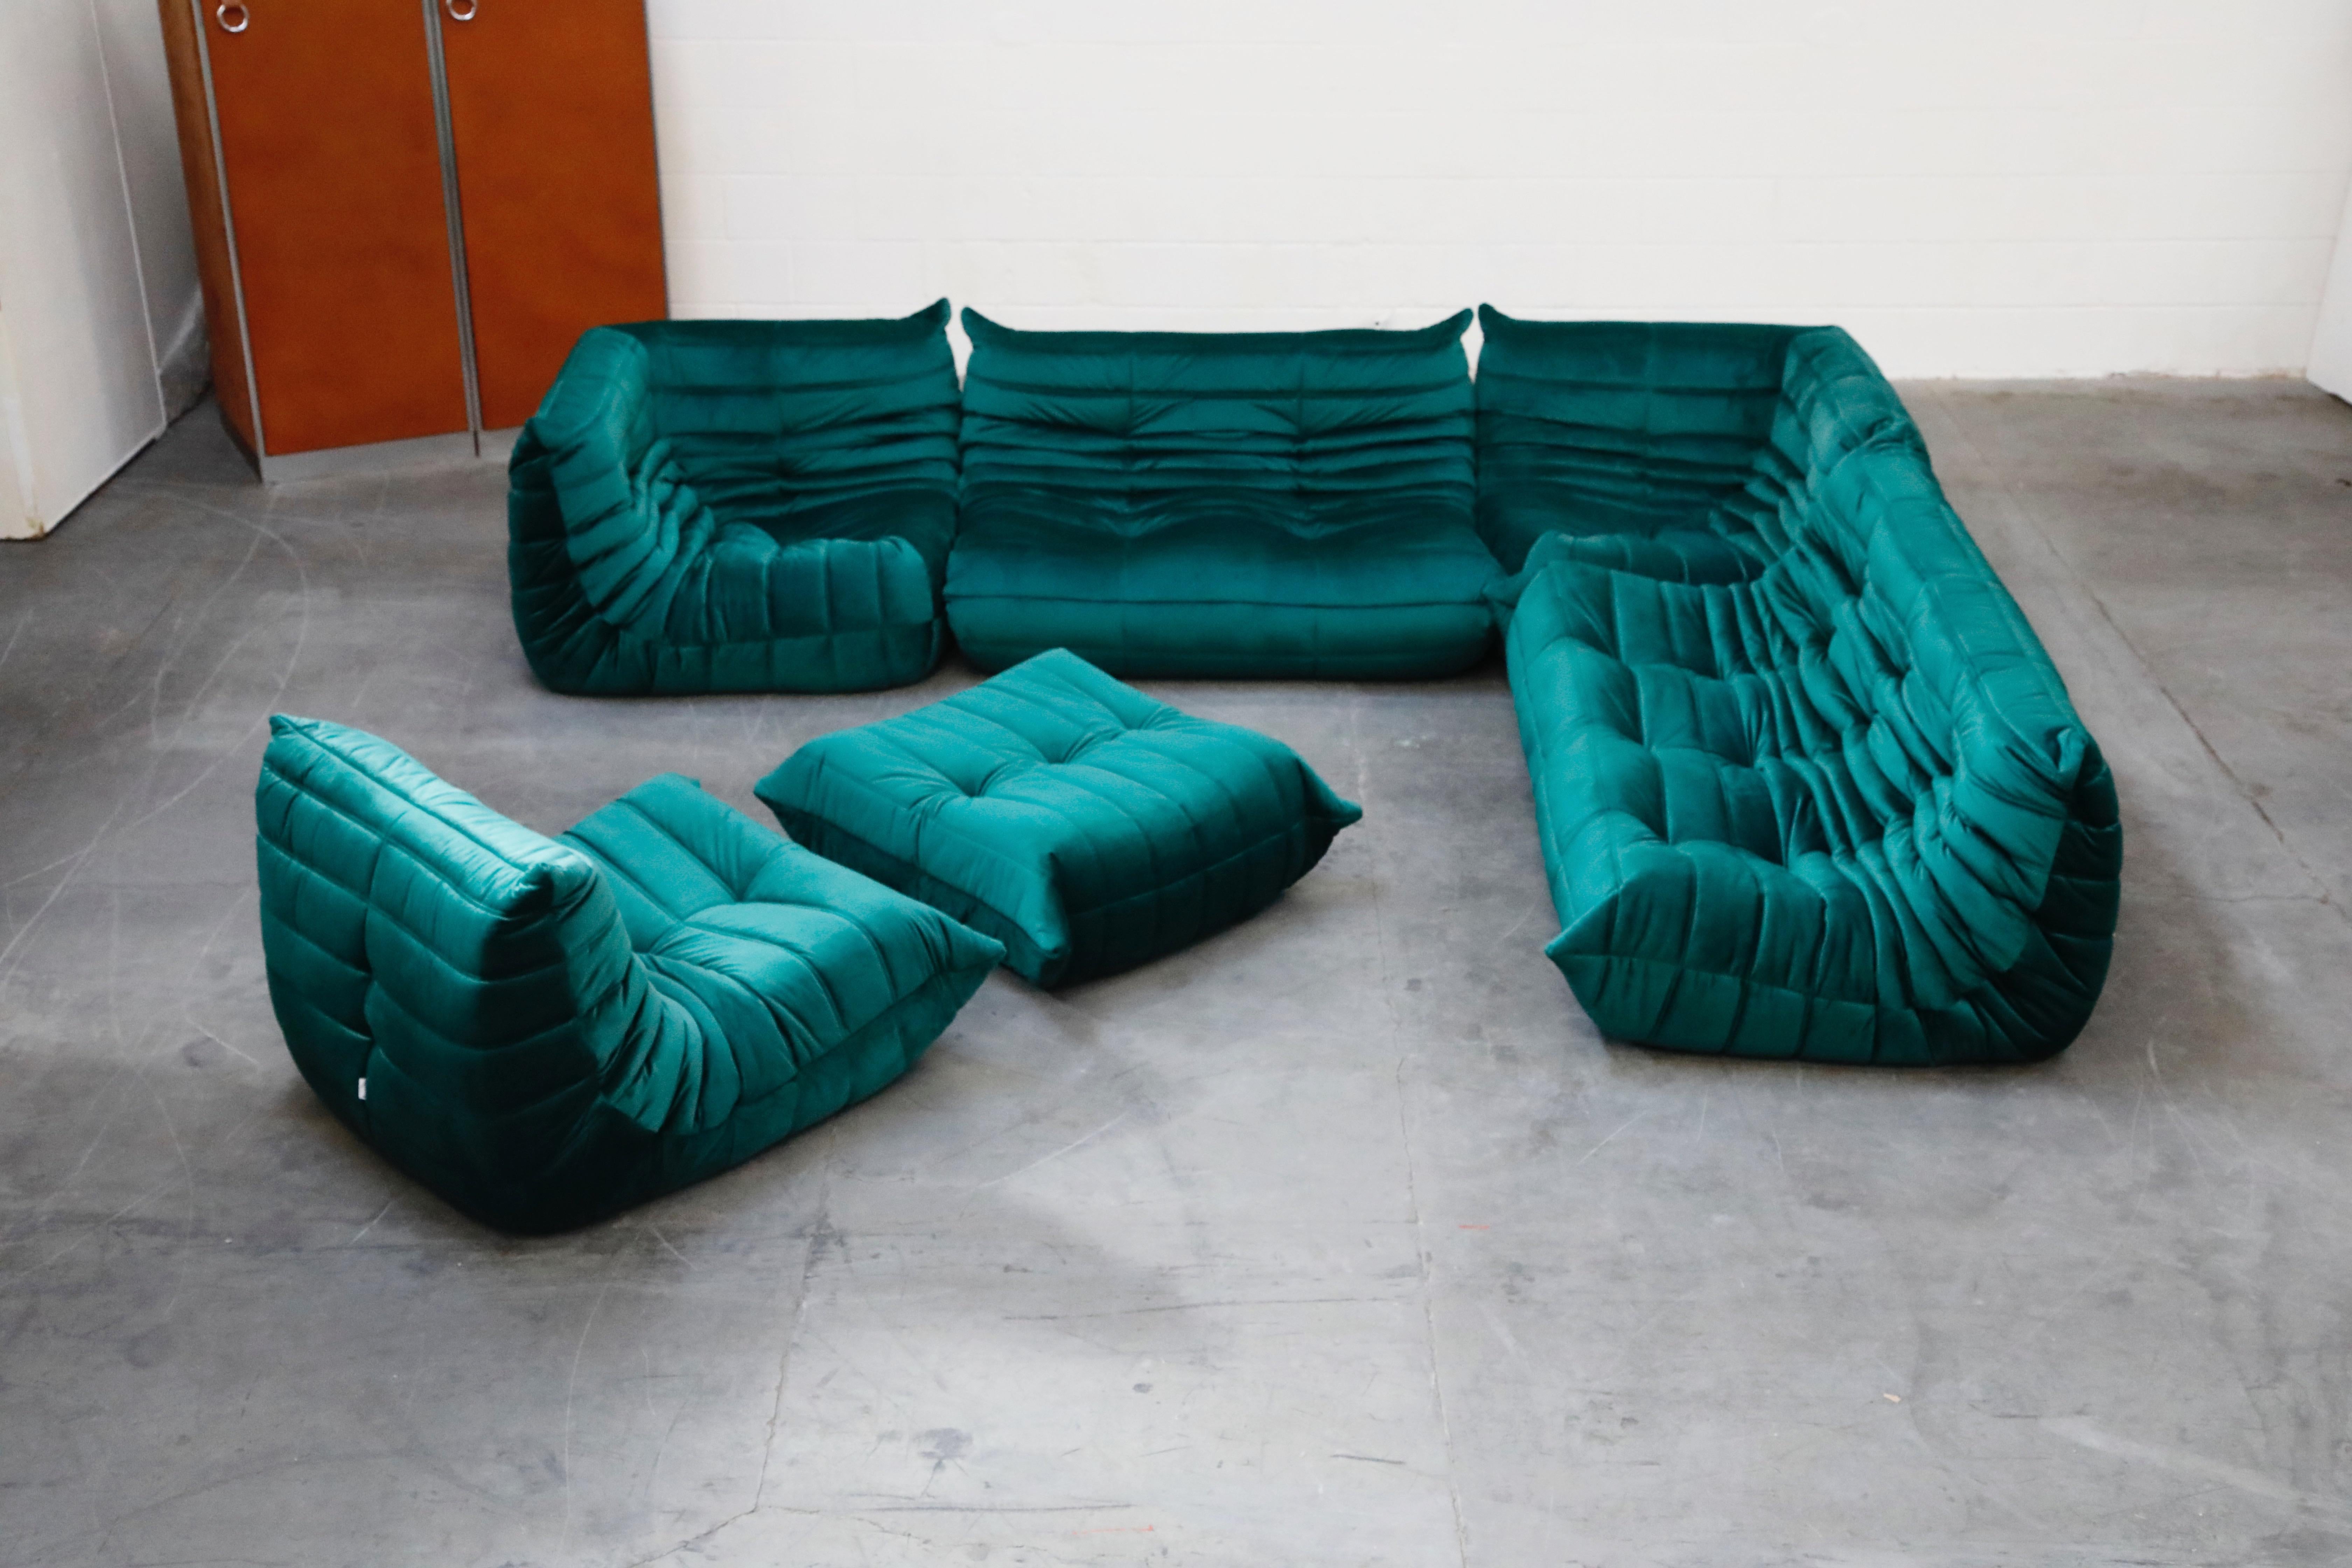 This incredible six (6) piece Togo sectional living room set, was designed by Michel Ducaroy in 1973 for Ligne Roset, France. This set was completely restored with new high grade velvet upholstery in a mesmerizing emerald green color, and bottom